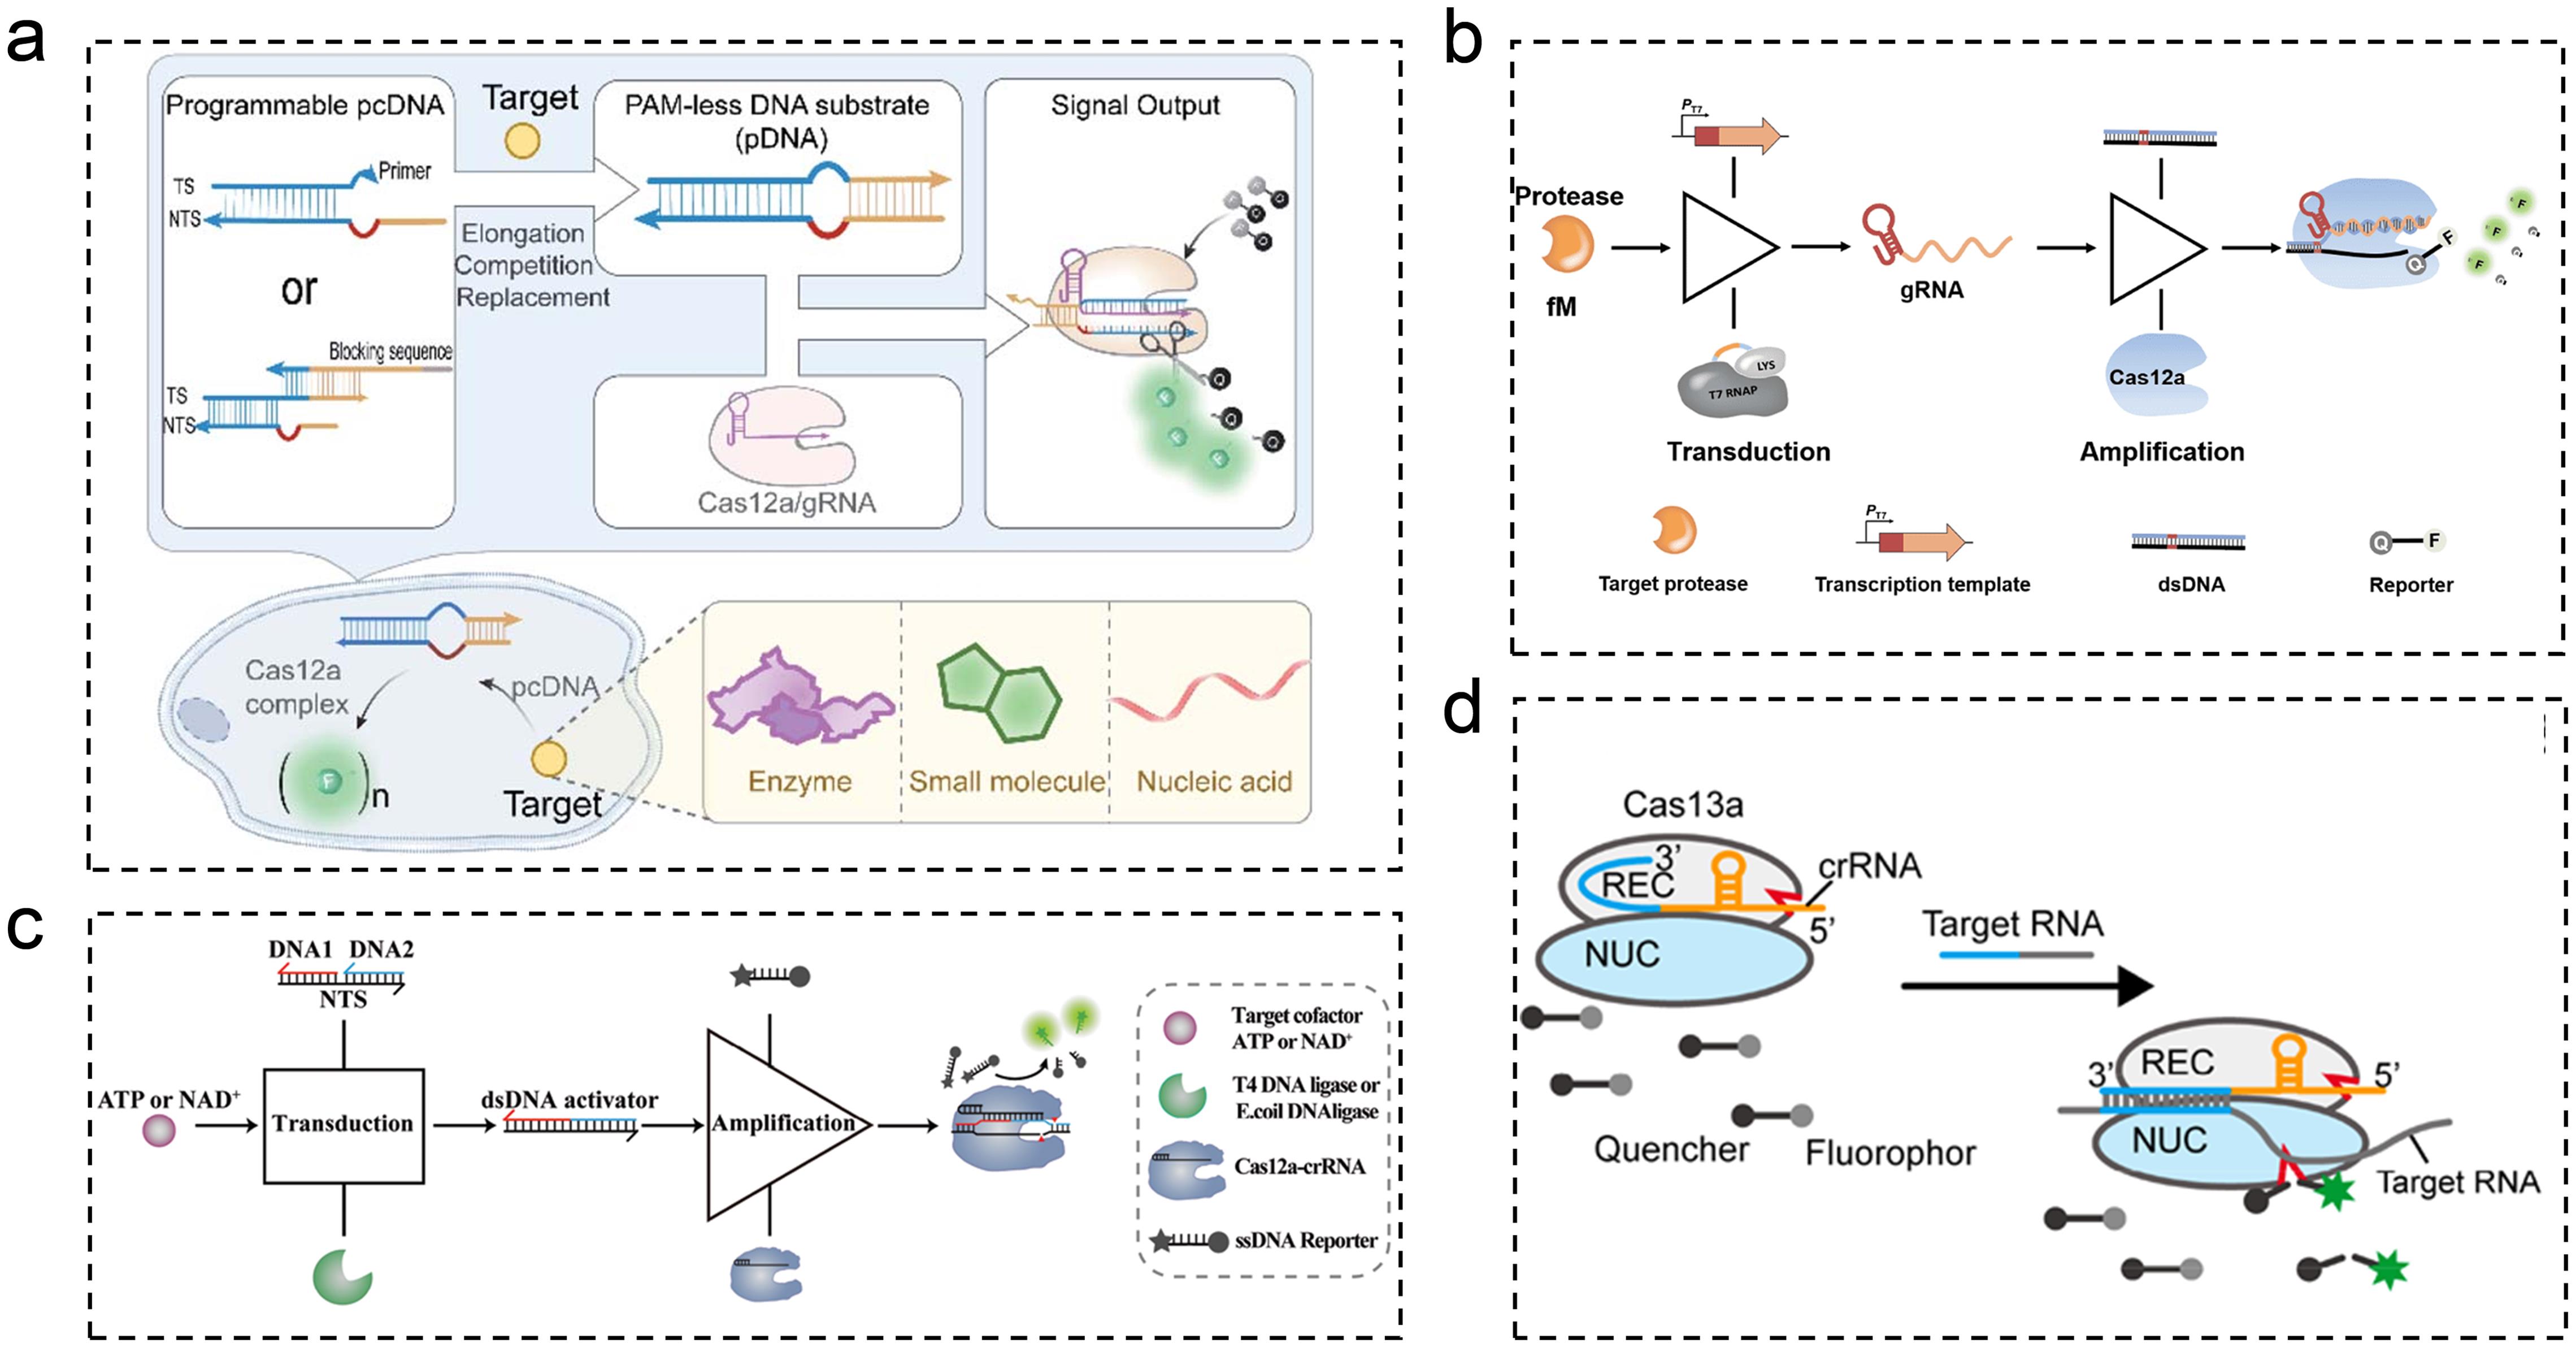 The innovative combination of CRISPR/Cas technology with immunoassay, DNA nanotechnology, and multiple signal amplification technologies provides a fundamental platform for tumor marker monitoring.